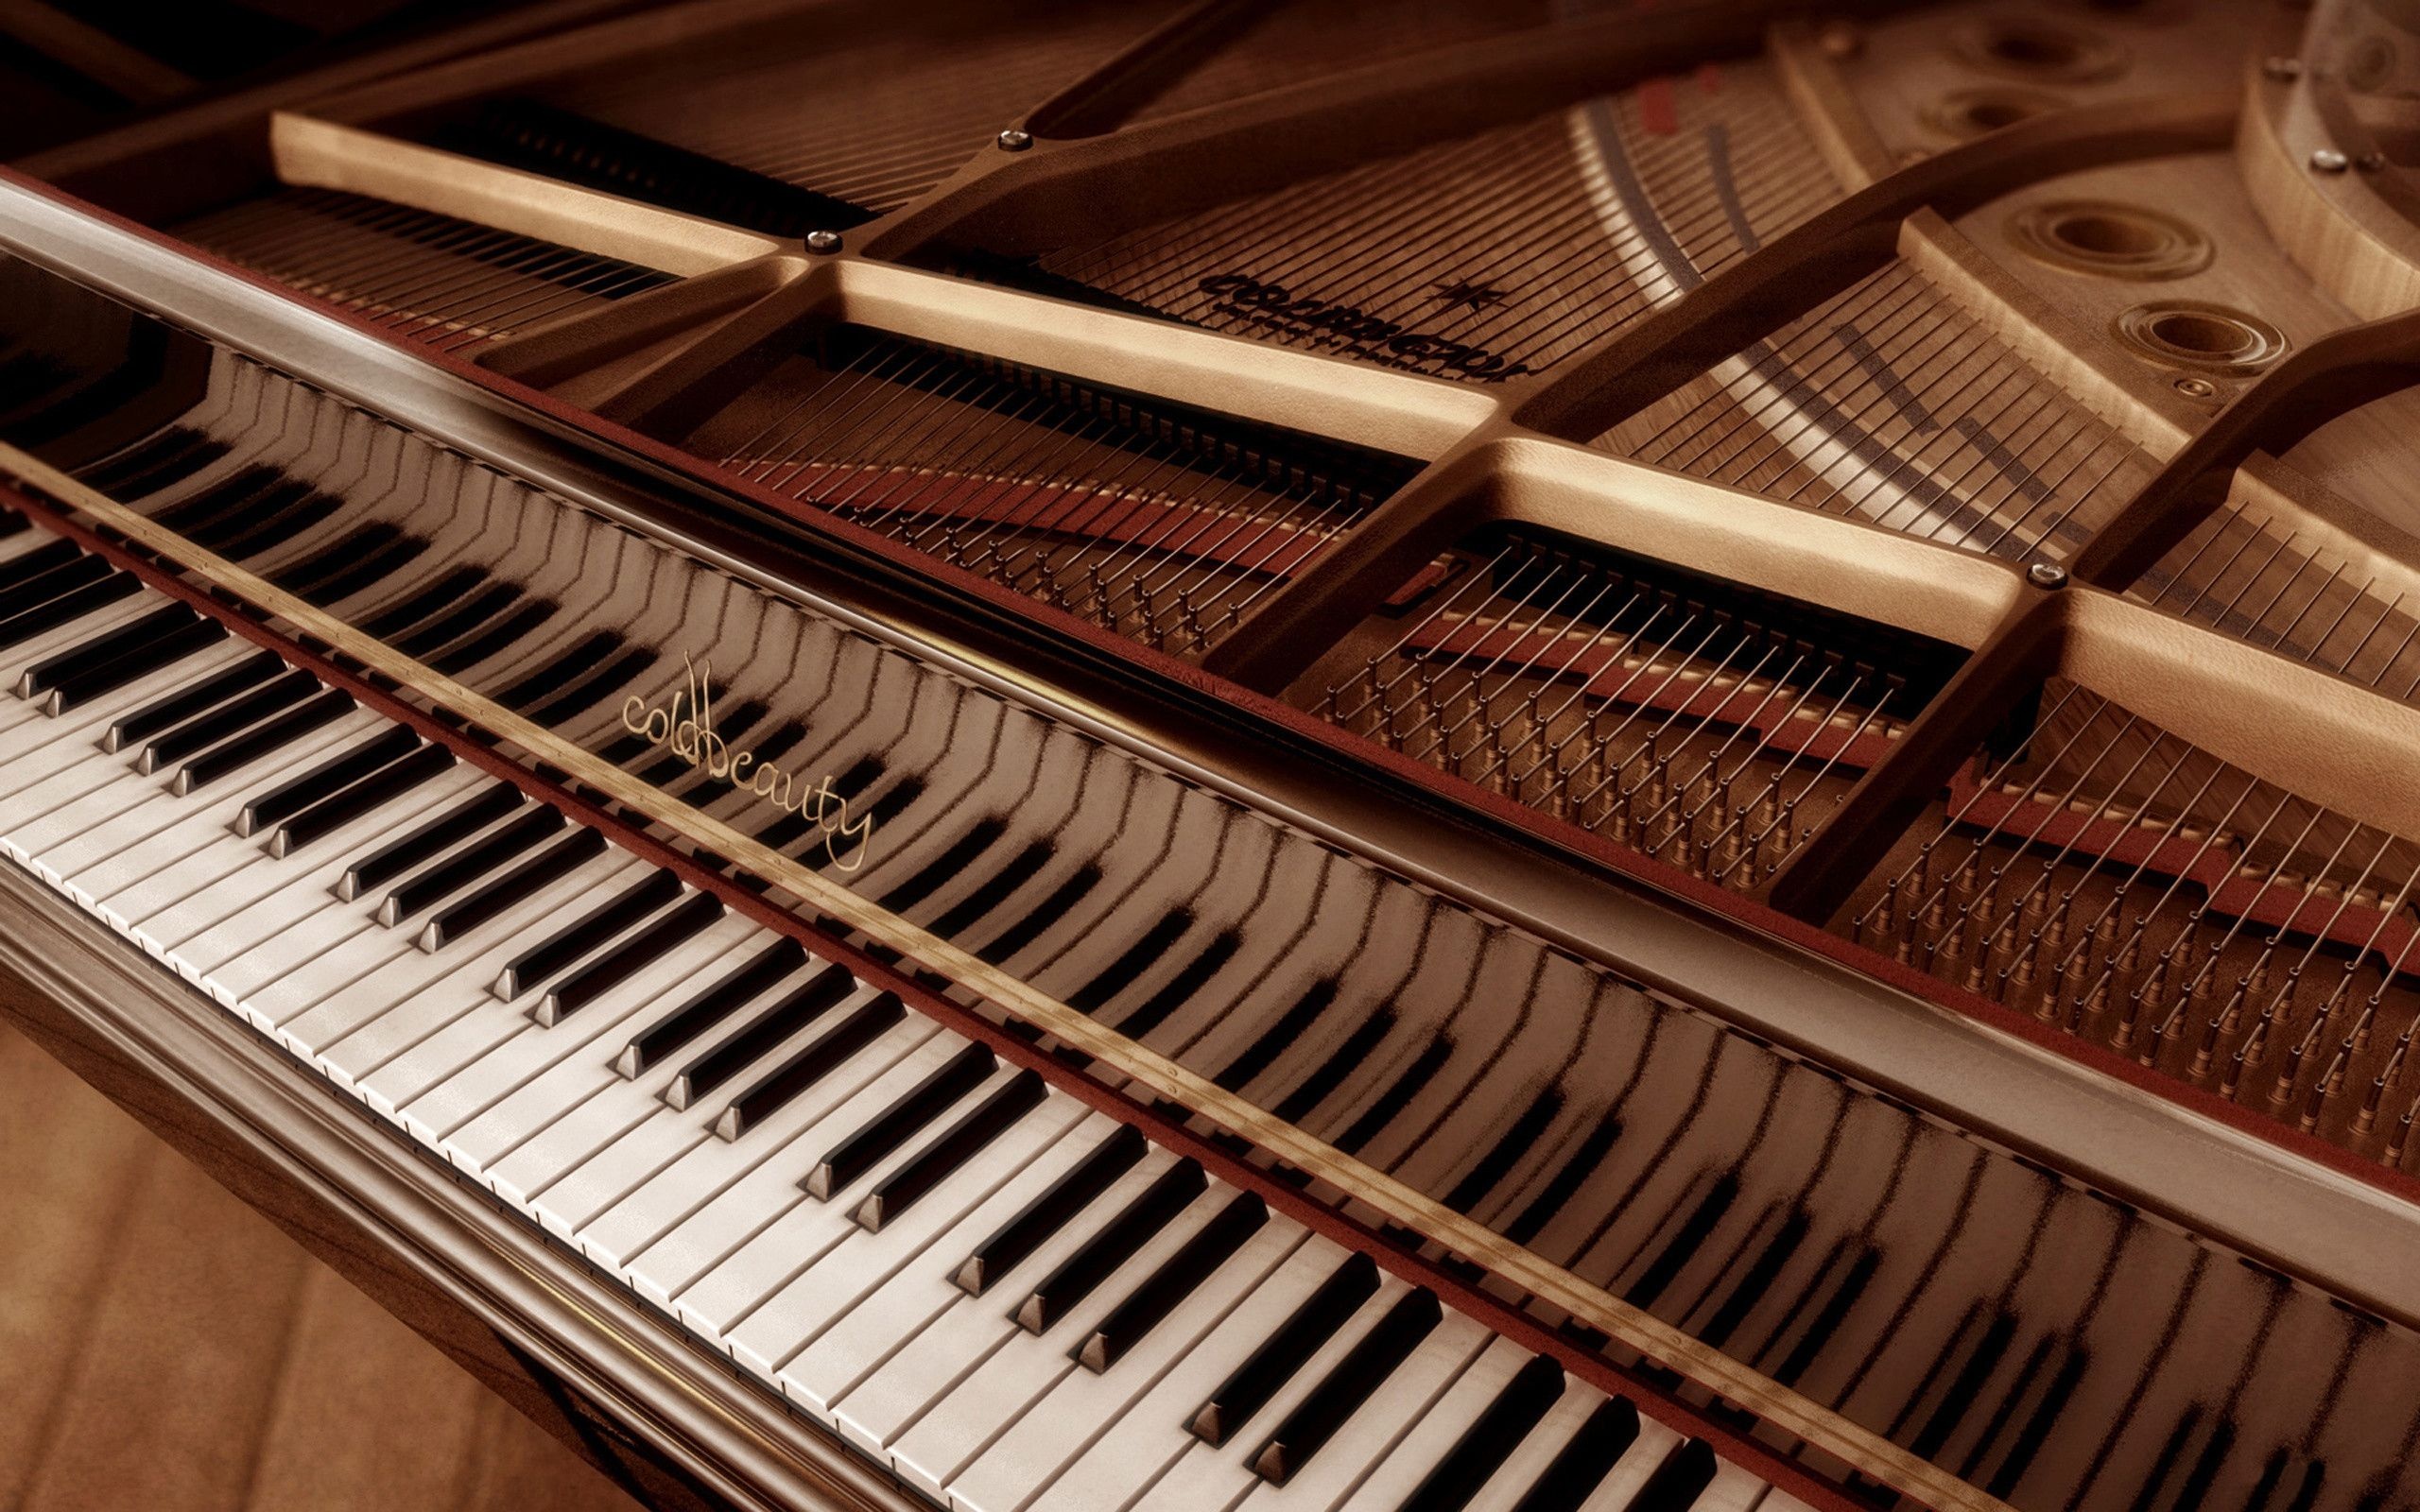 Grand Piano: Yamaha, Coldbeauty, A very large stringed keyboard music instrument used for concerts. 2560x1600 HD Wallpaper.